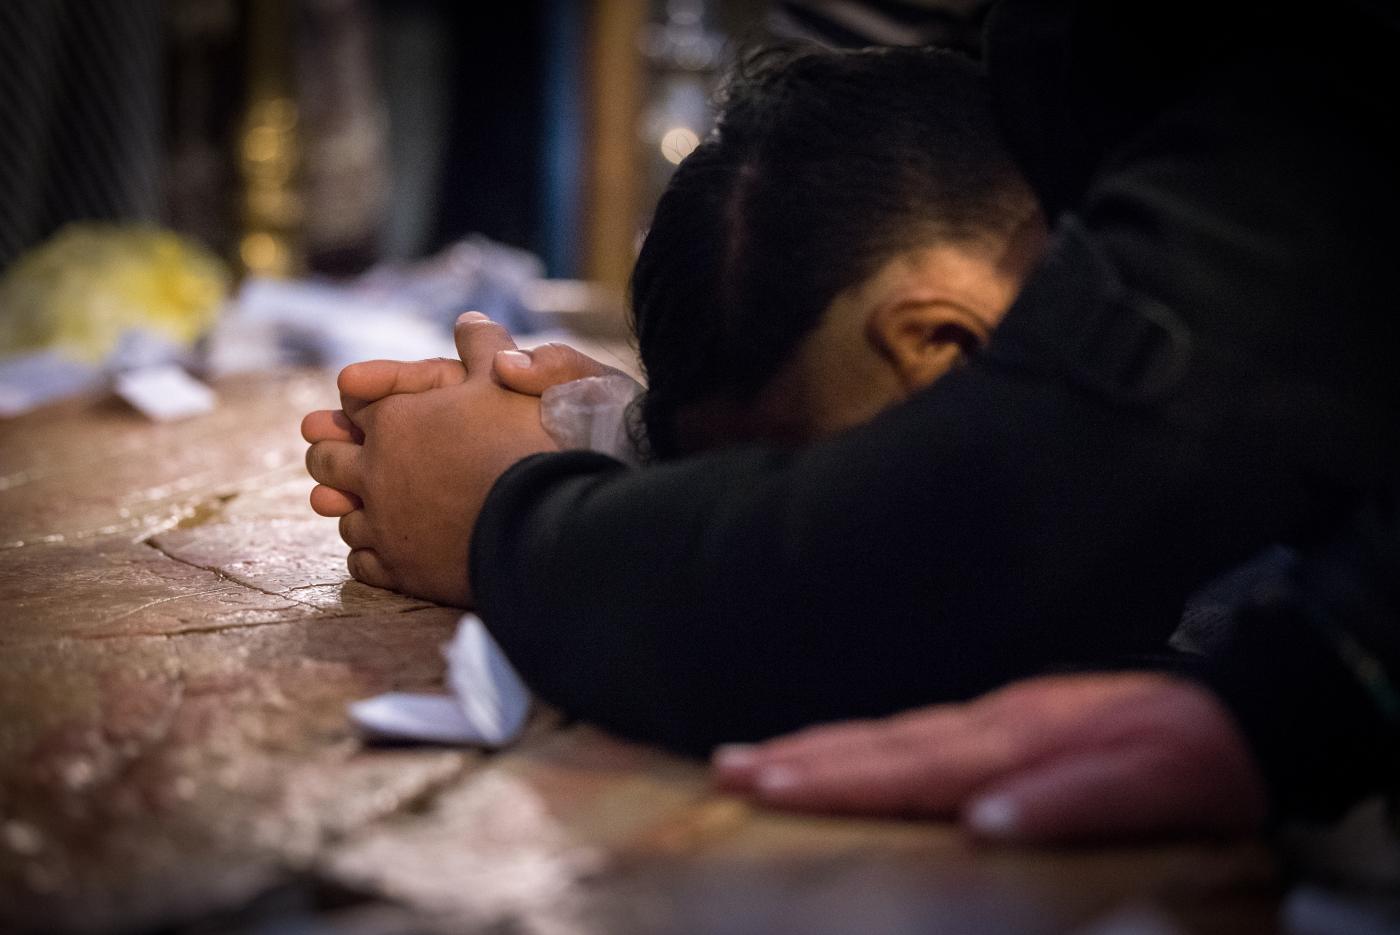 A man prays with his hands clasped and face burried in his arms, on the Stone of Anointing.